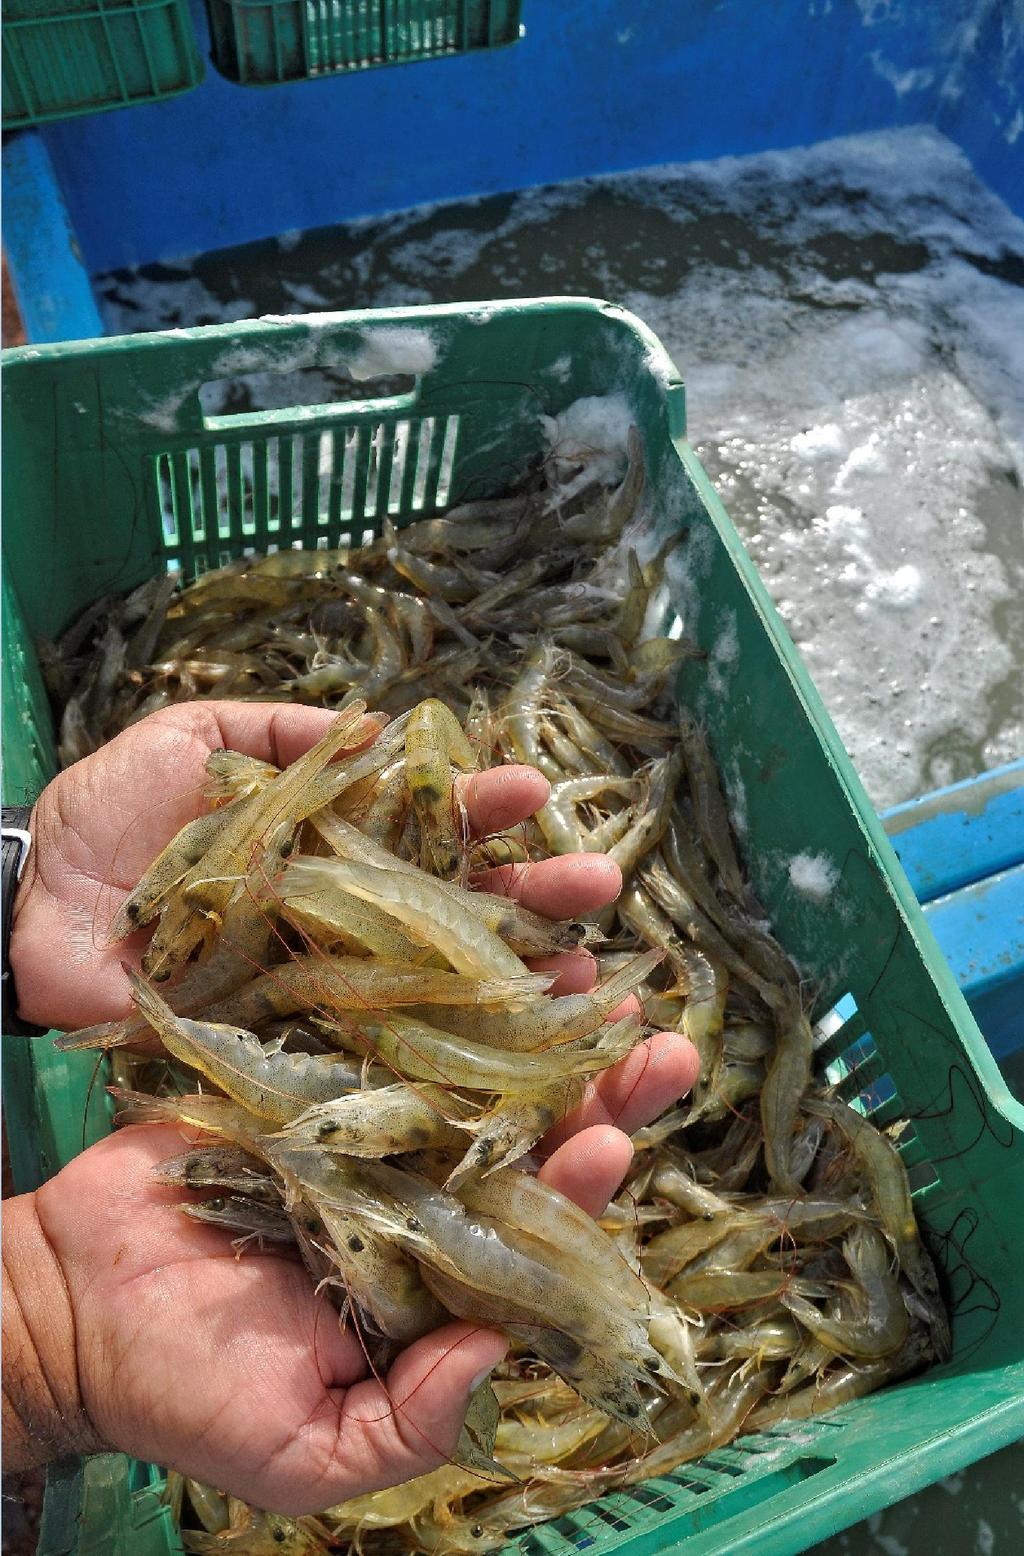 THE SHRIMP INDUSTRY AND MARINE FISH FARMING IN